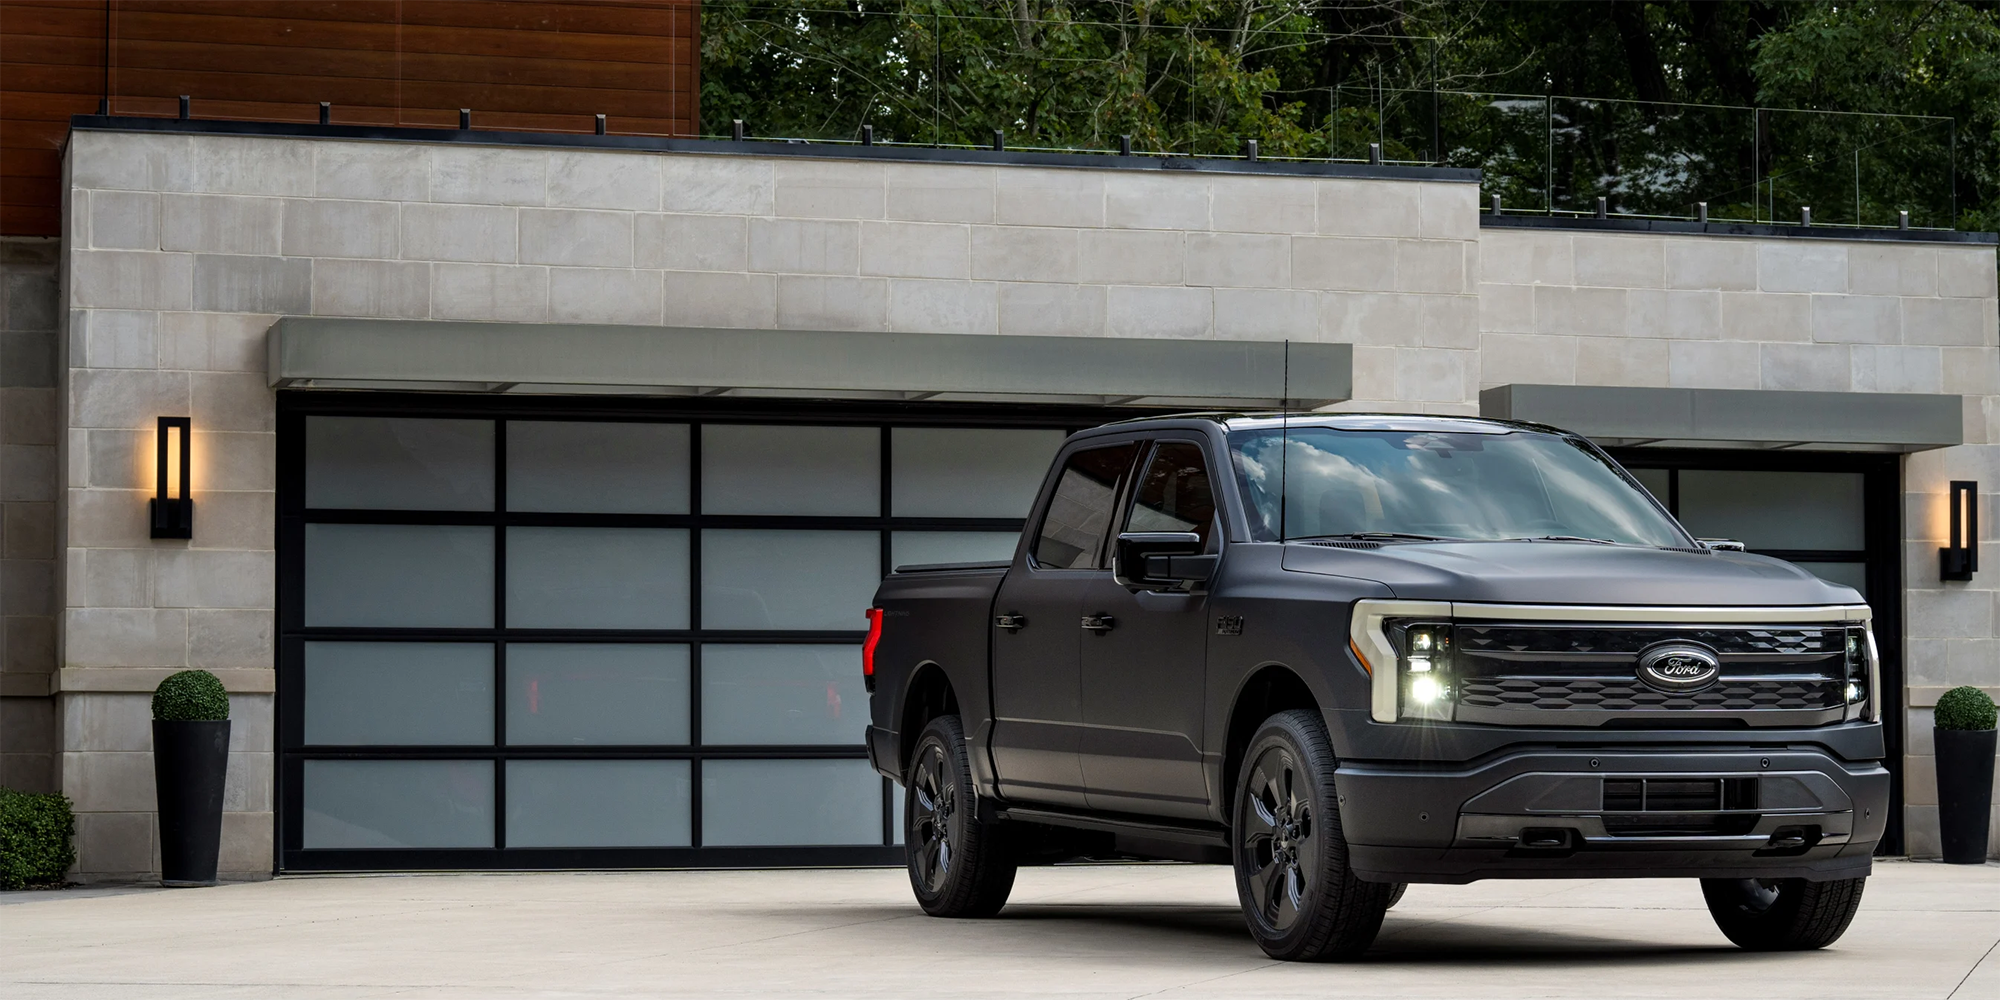 Ford's F-150 Lightning Platinum Black edition is a hot choice